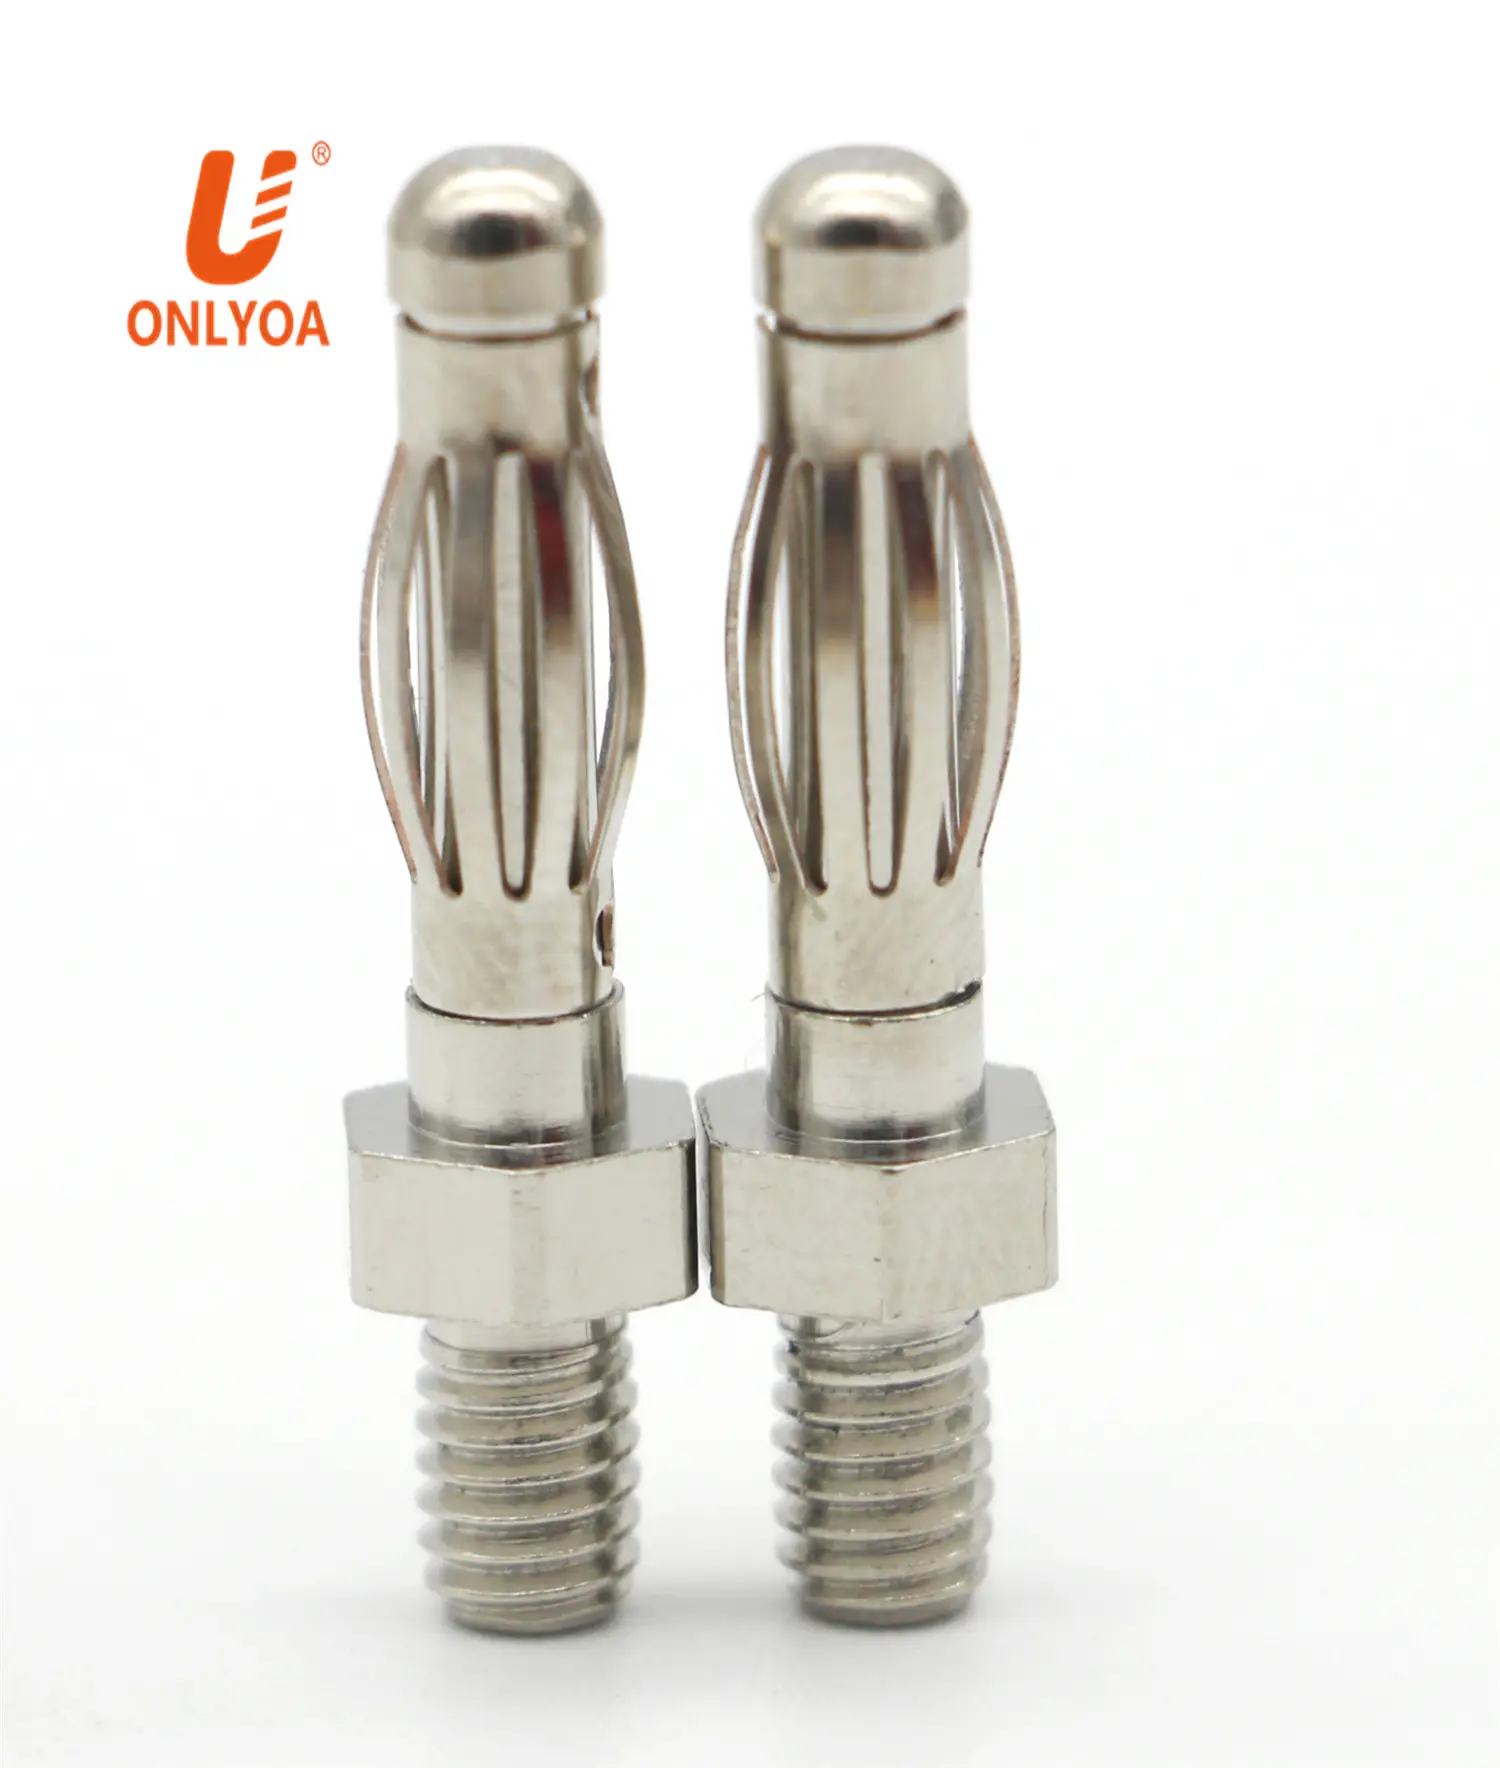 4mm with Hexagon M4 Thread and NUT nickel plated male bullet banana plug connector For RC Hobby Car Model and Lipo battery